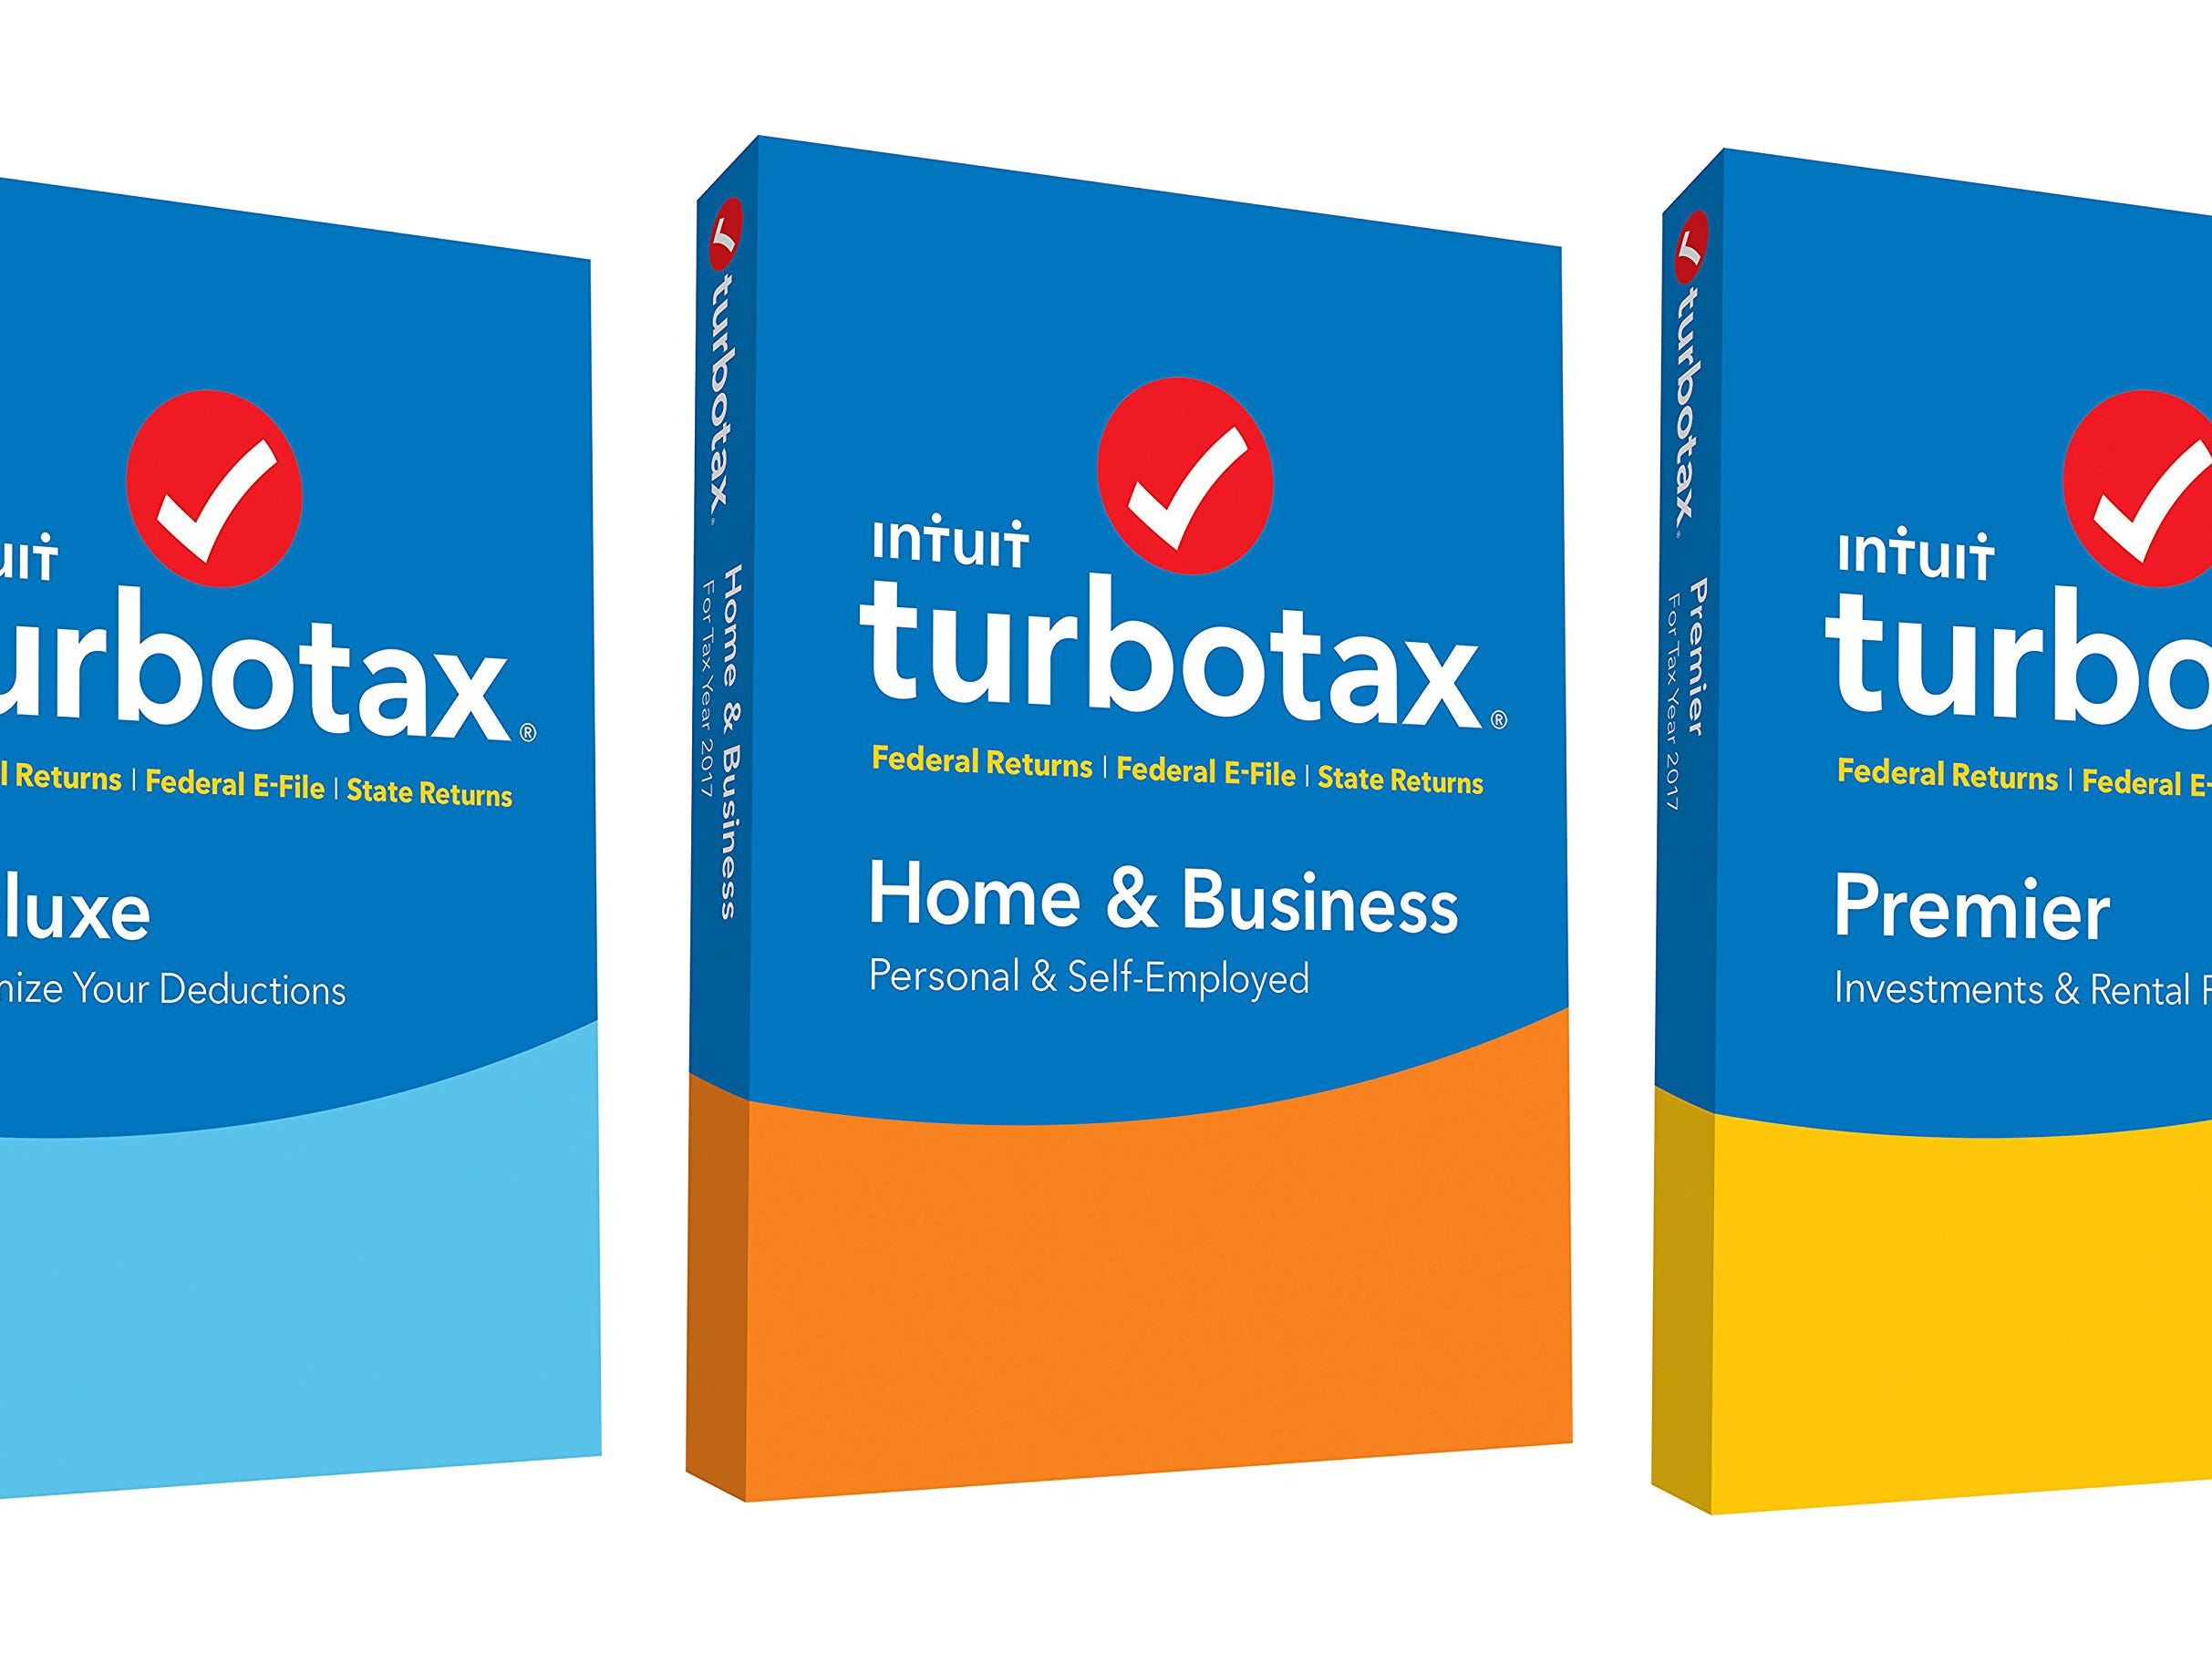 No matter what you need, the right TurboTax software is waiting for you.